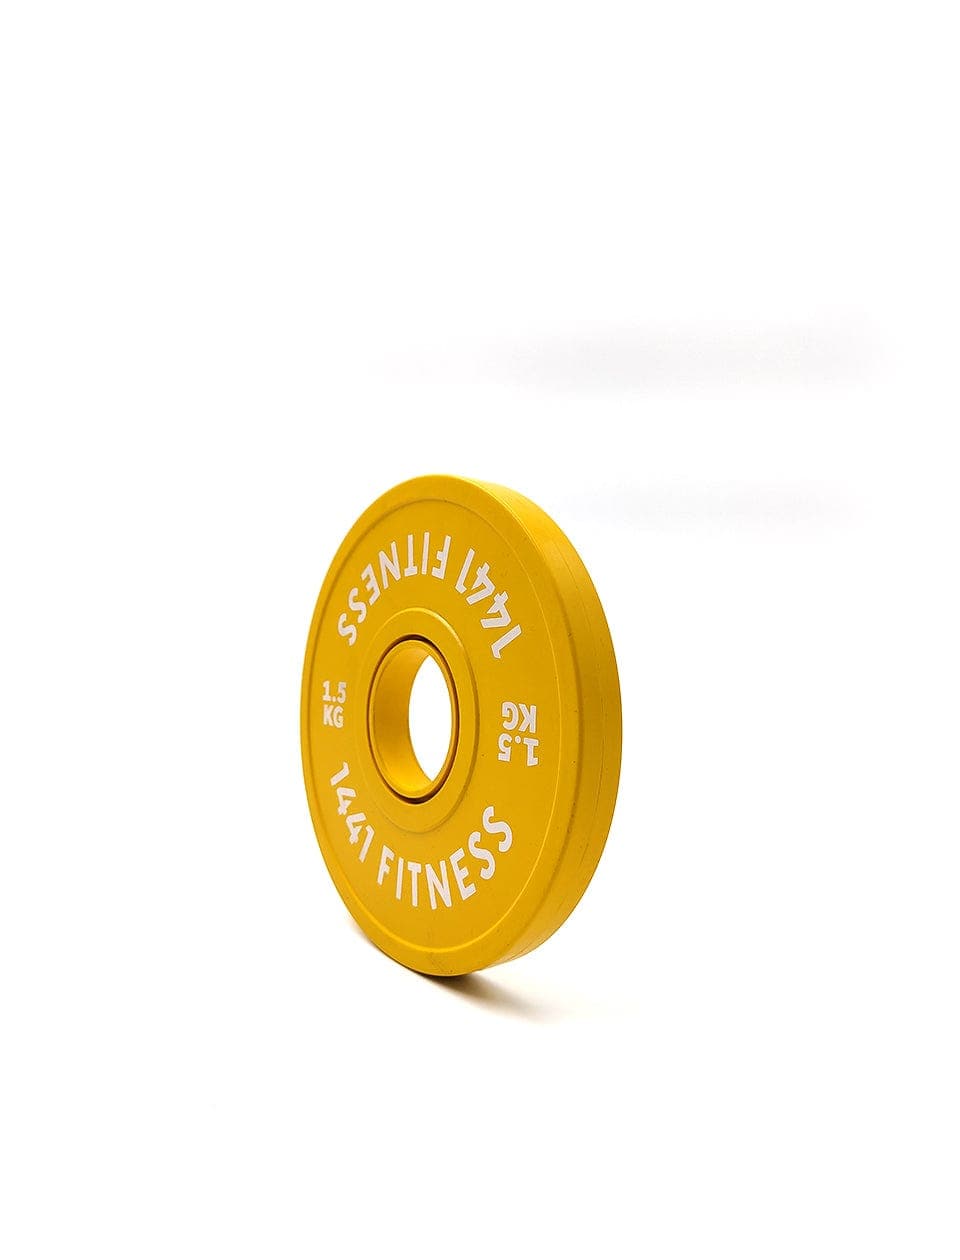 PRSAE Plates & Bars 1441 Fitness Fractional Bumper Weight Plates 0.5 kg to 2.5 Kg - Sold as Per Piece